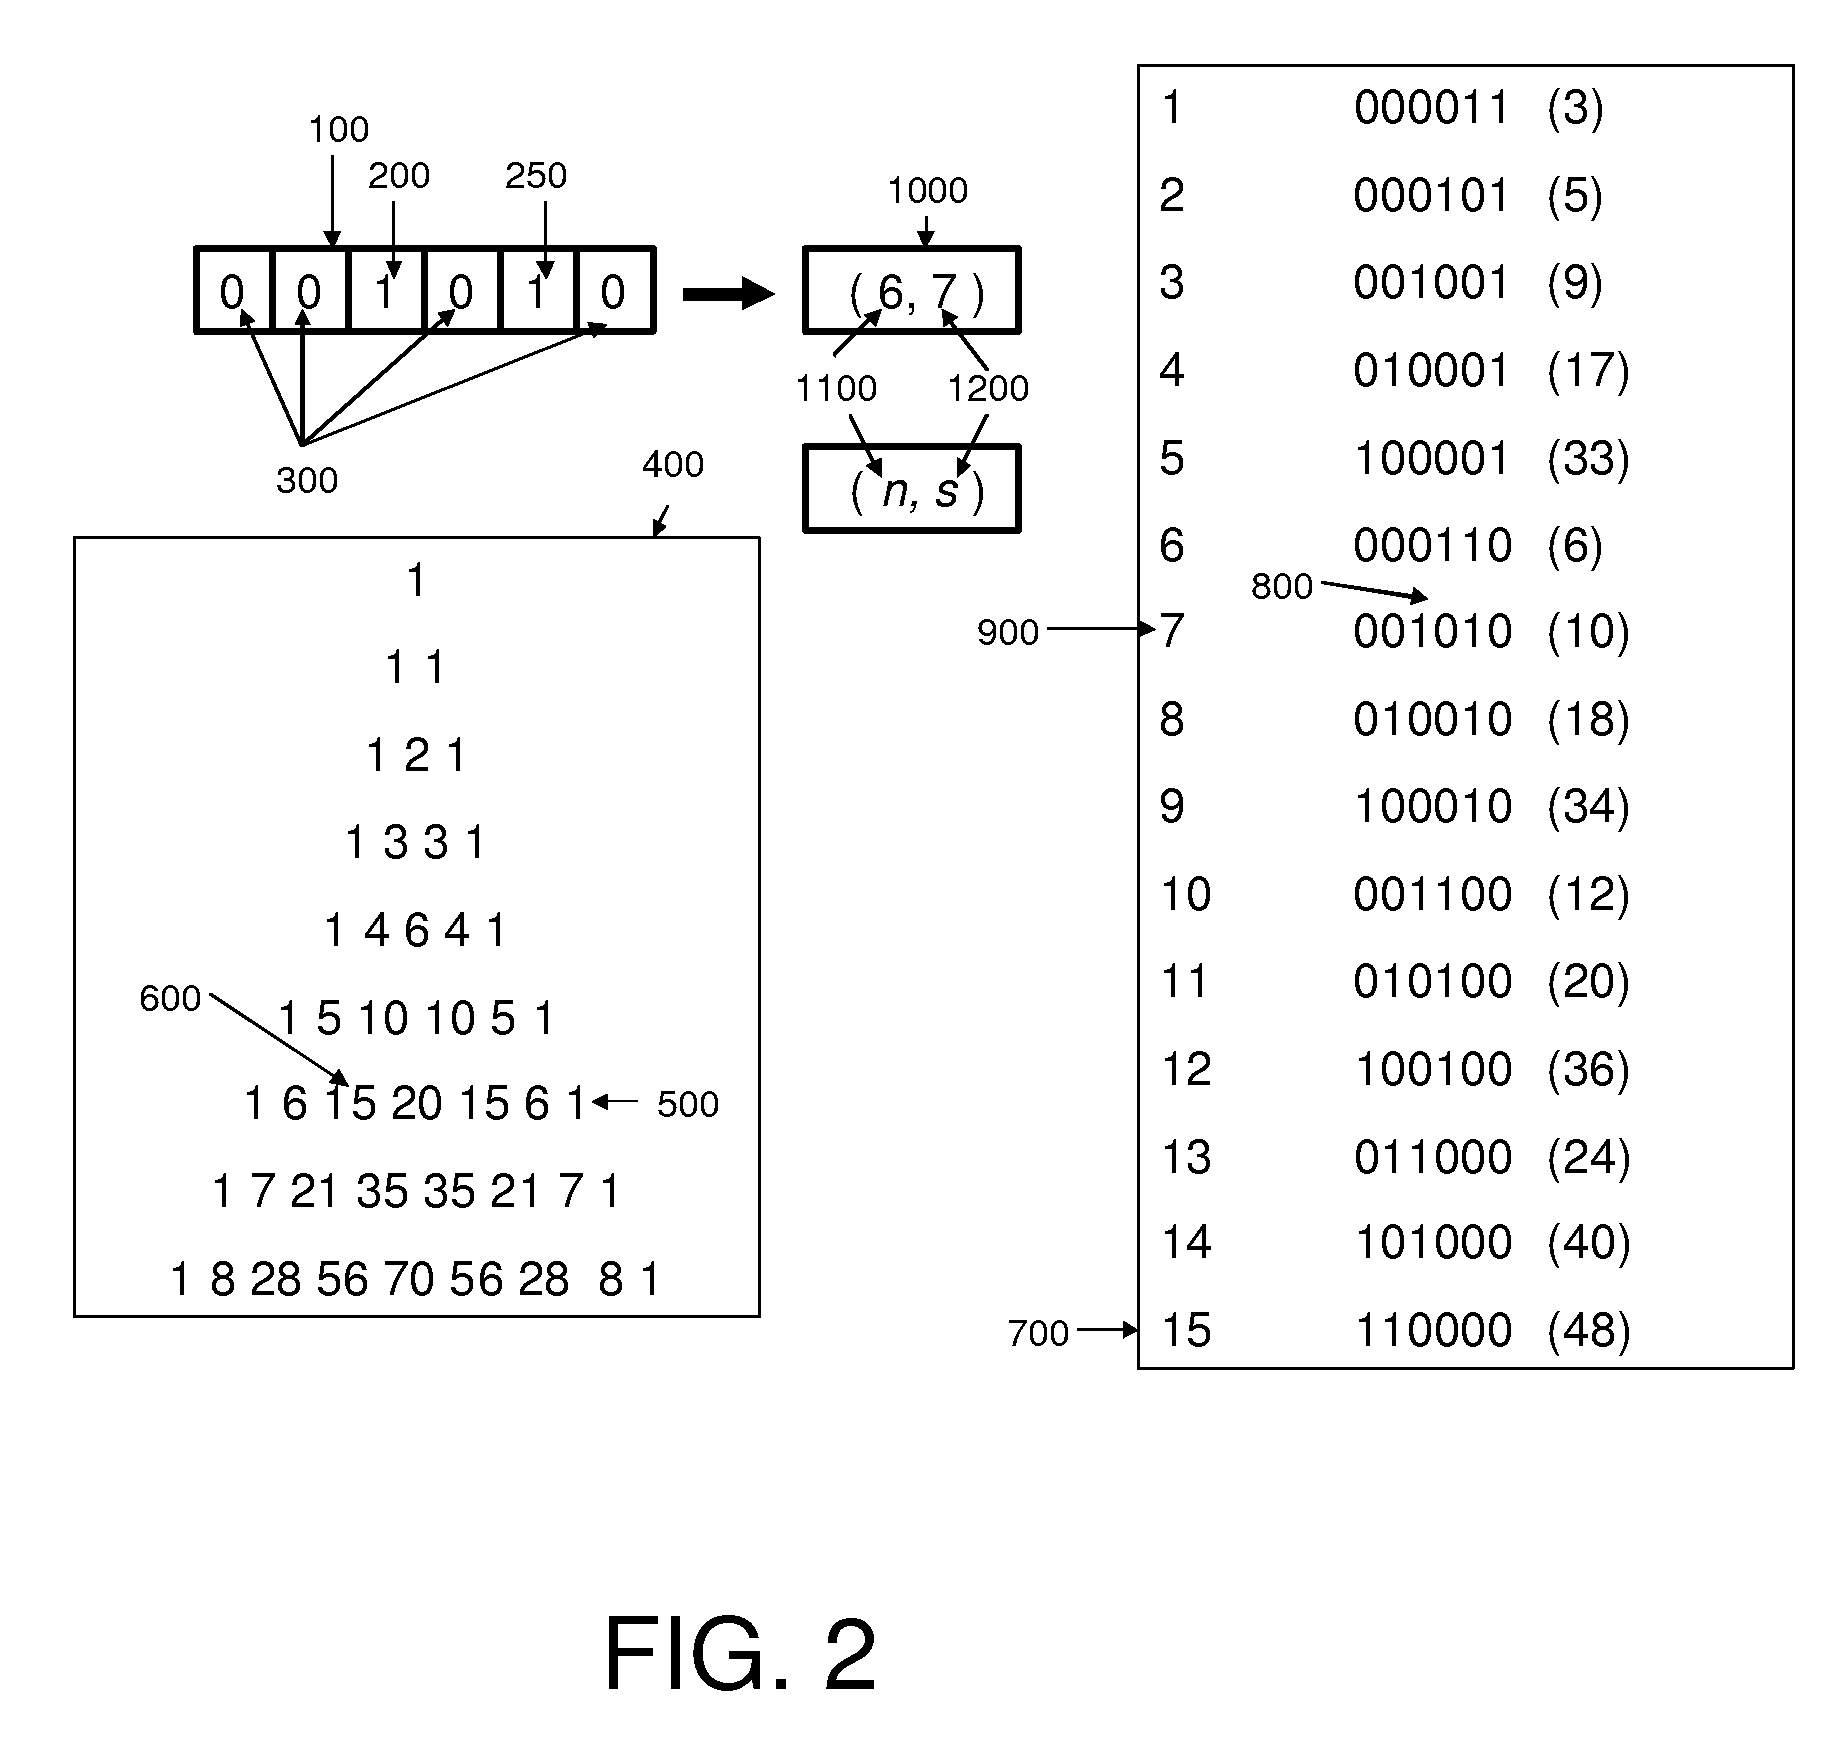 Adaptive combinatorial coding/decoding with specified occurrences for electrical computers and digital data processing systems